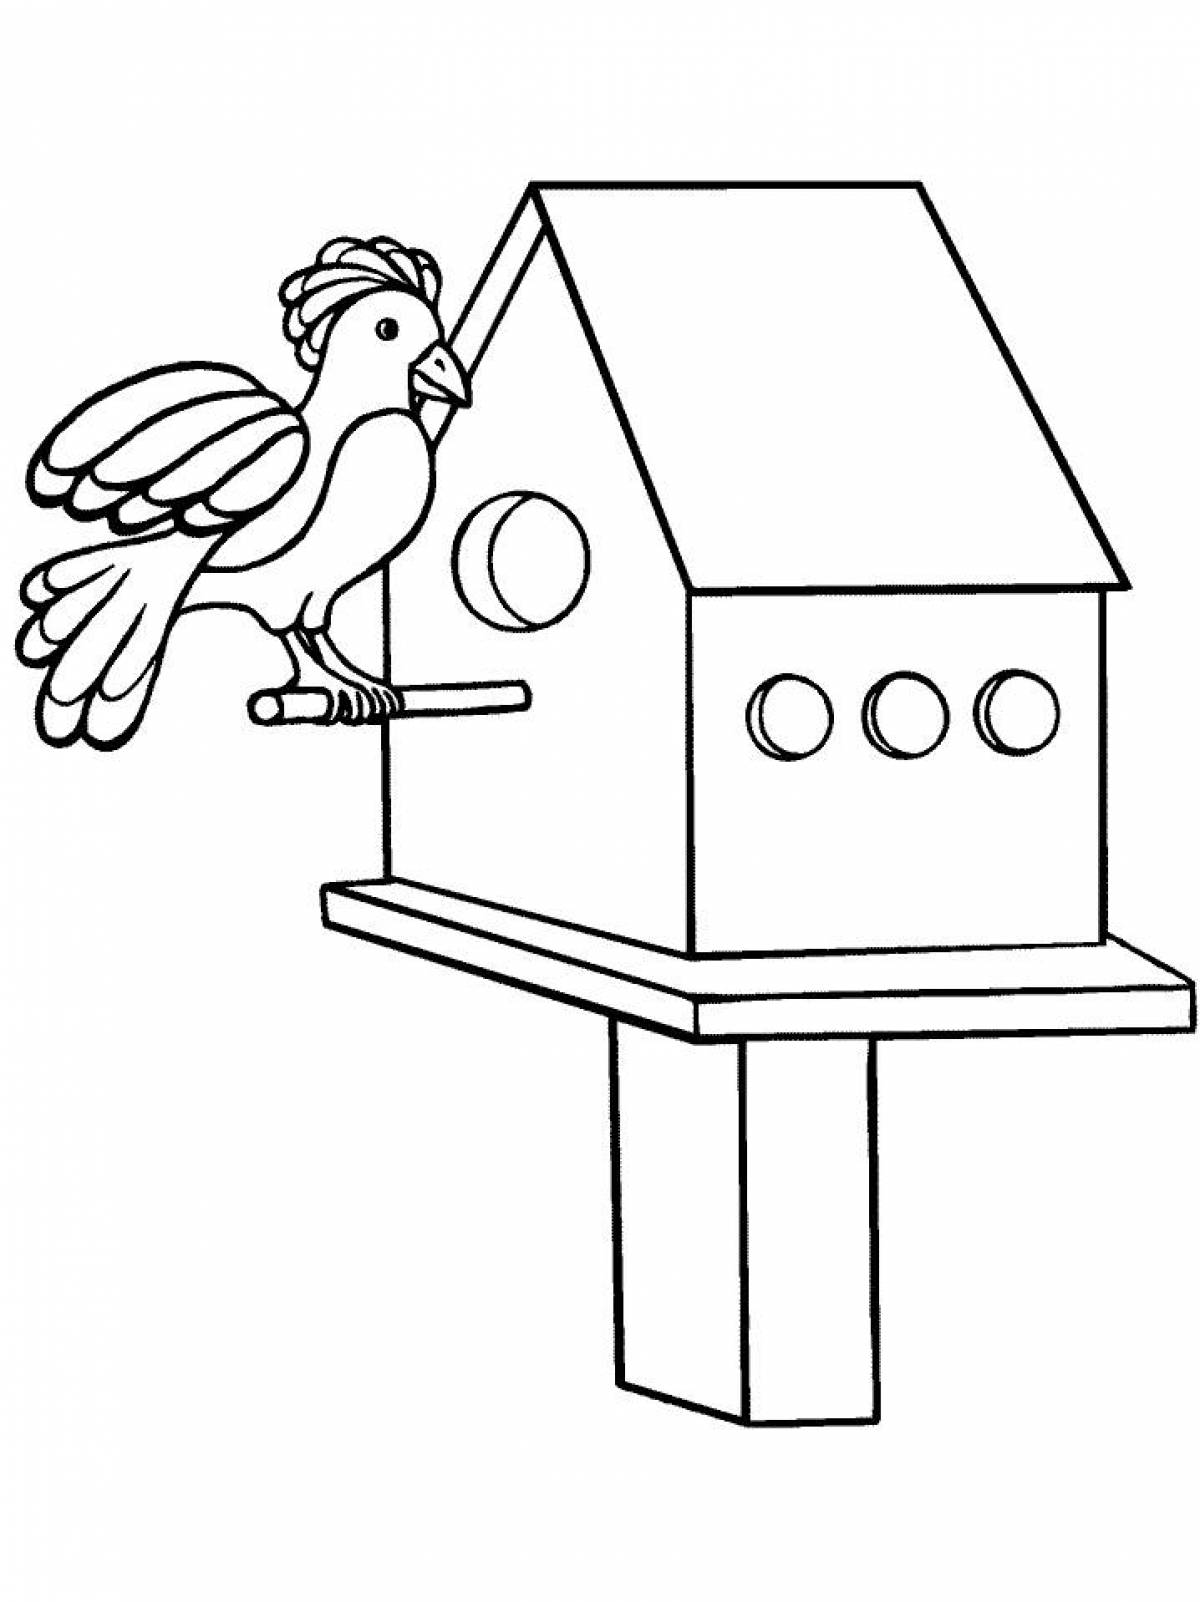 Coloring page gorgeous bird feeder